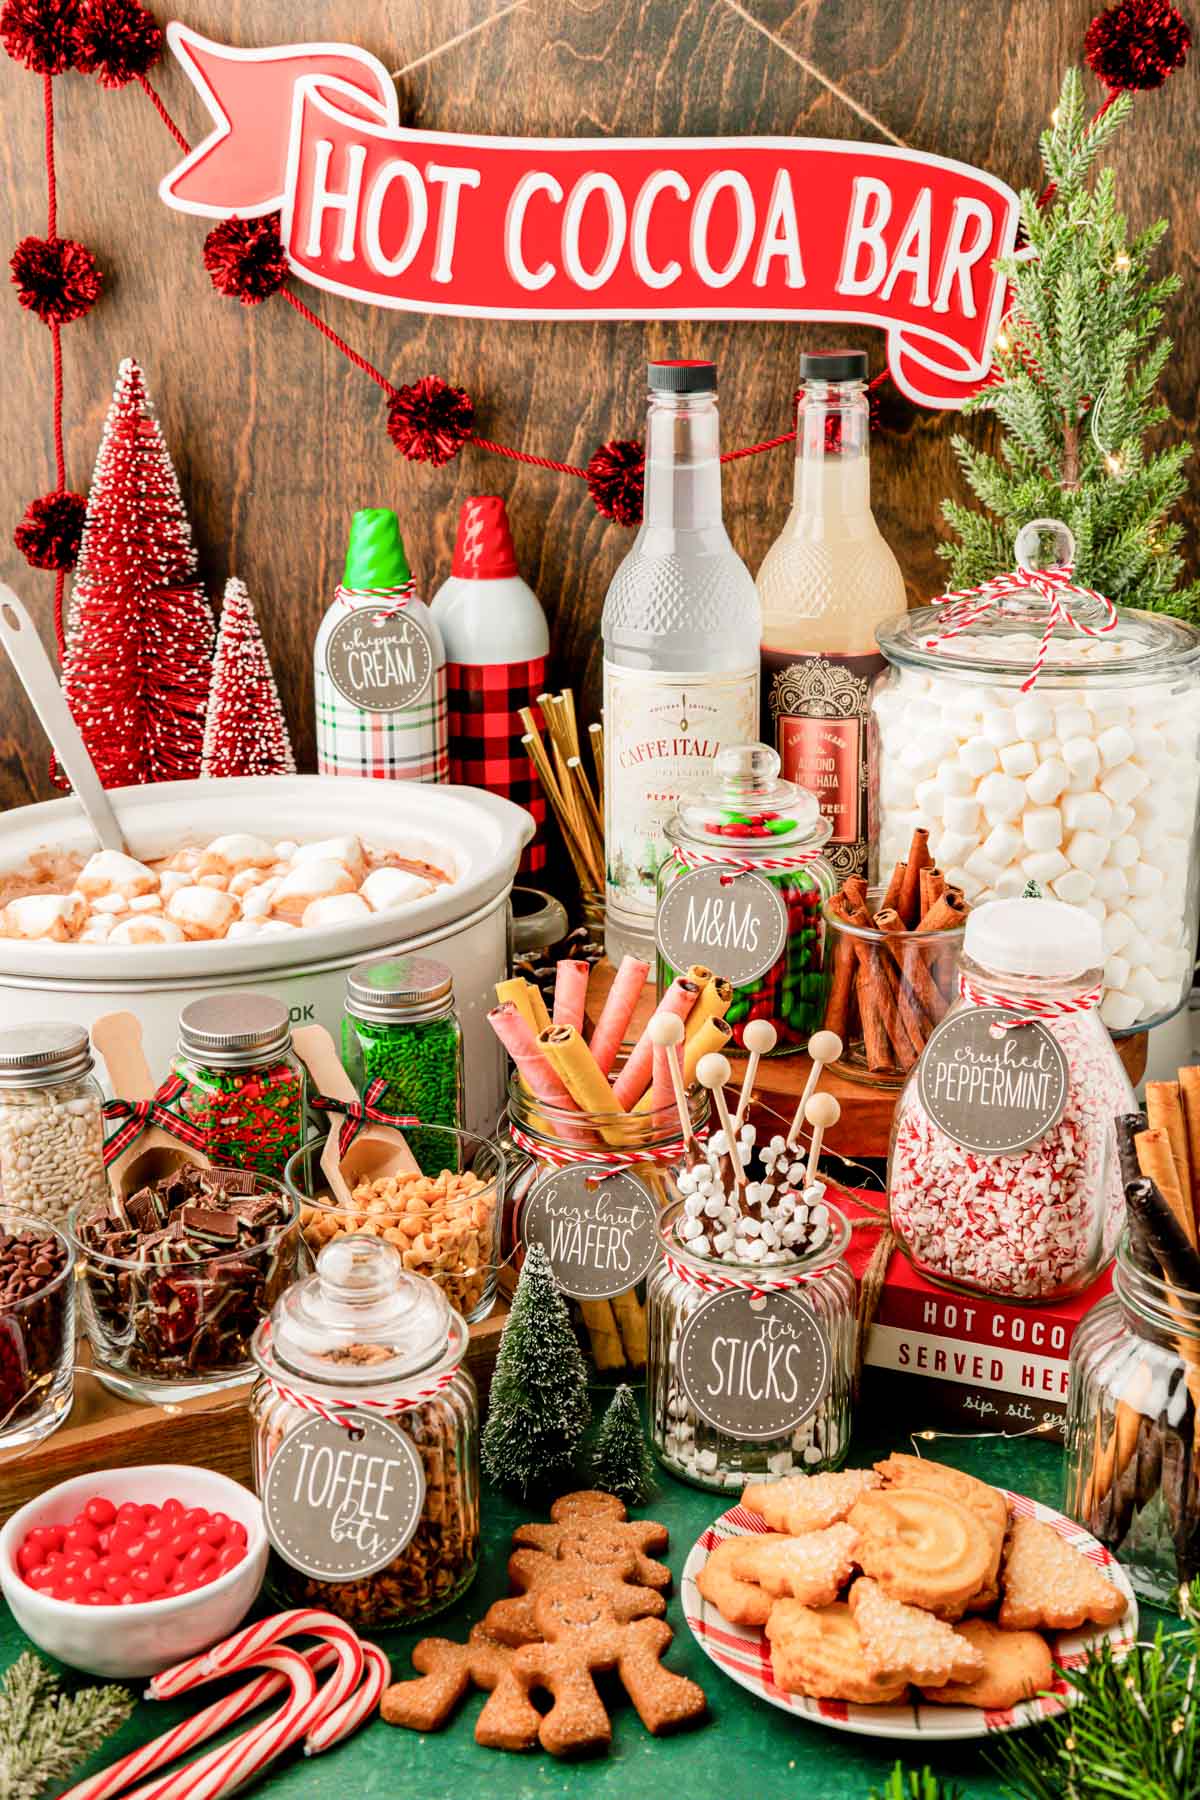 DIY Christmas Tablescape & Hot Chocolate Party How-To!